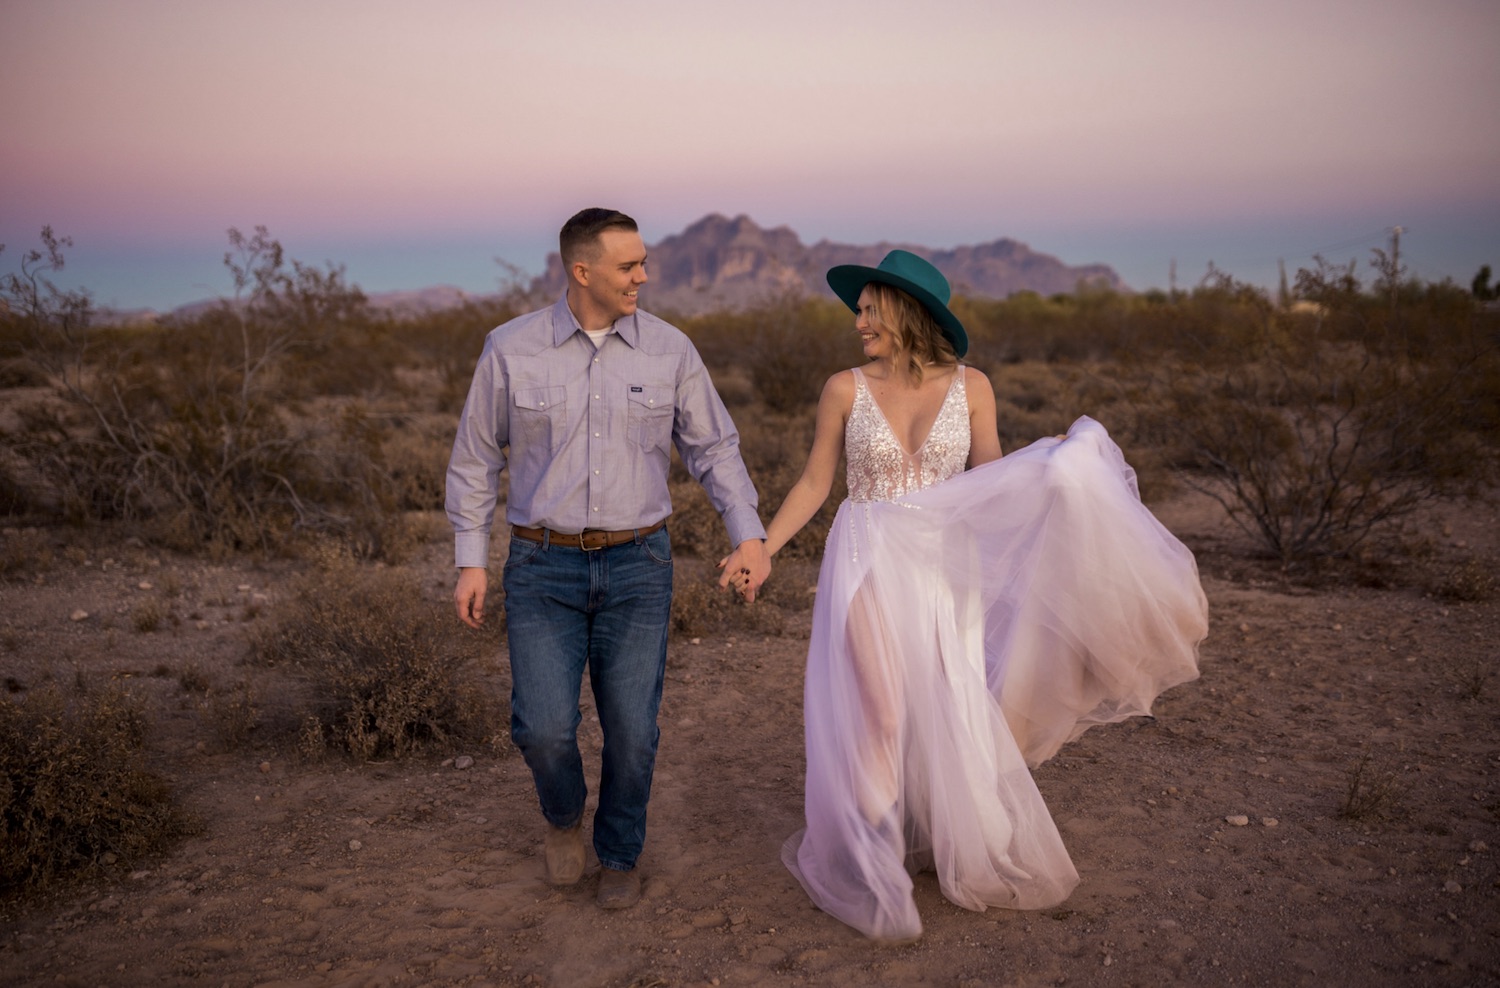 A bride and groom hold hands while walking in the desert during their adventure elopement photographed by Makayla McGarvey